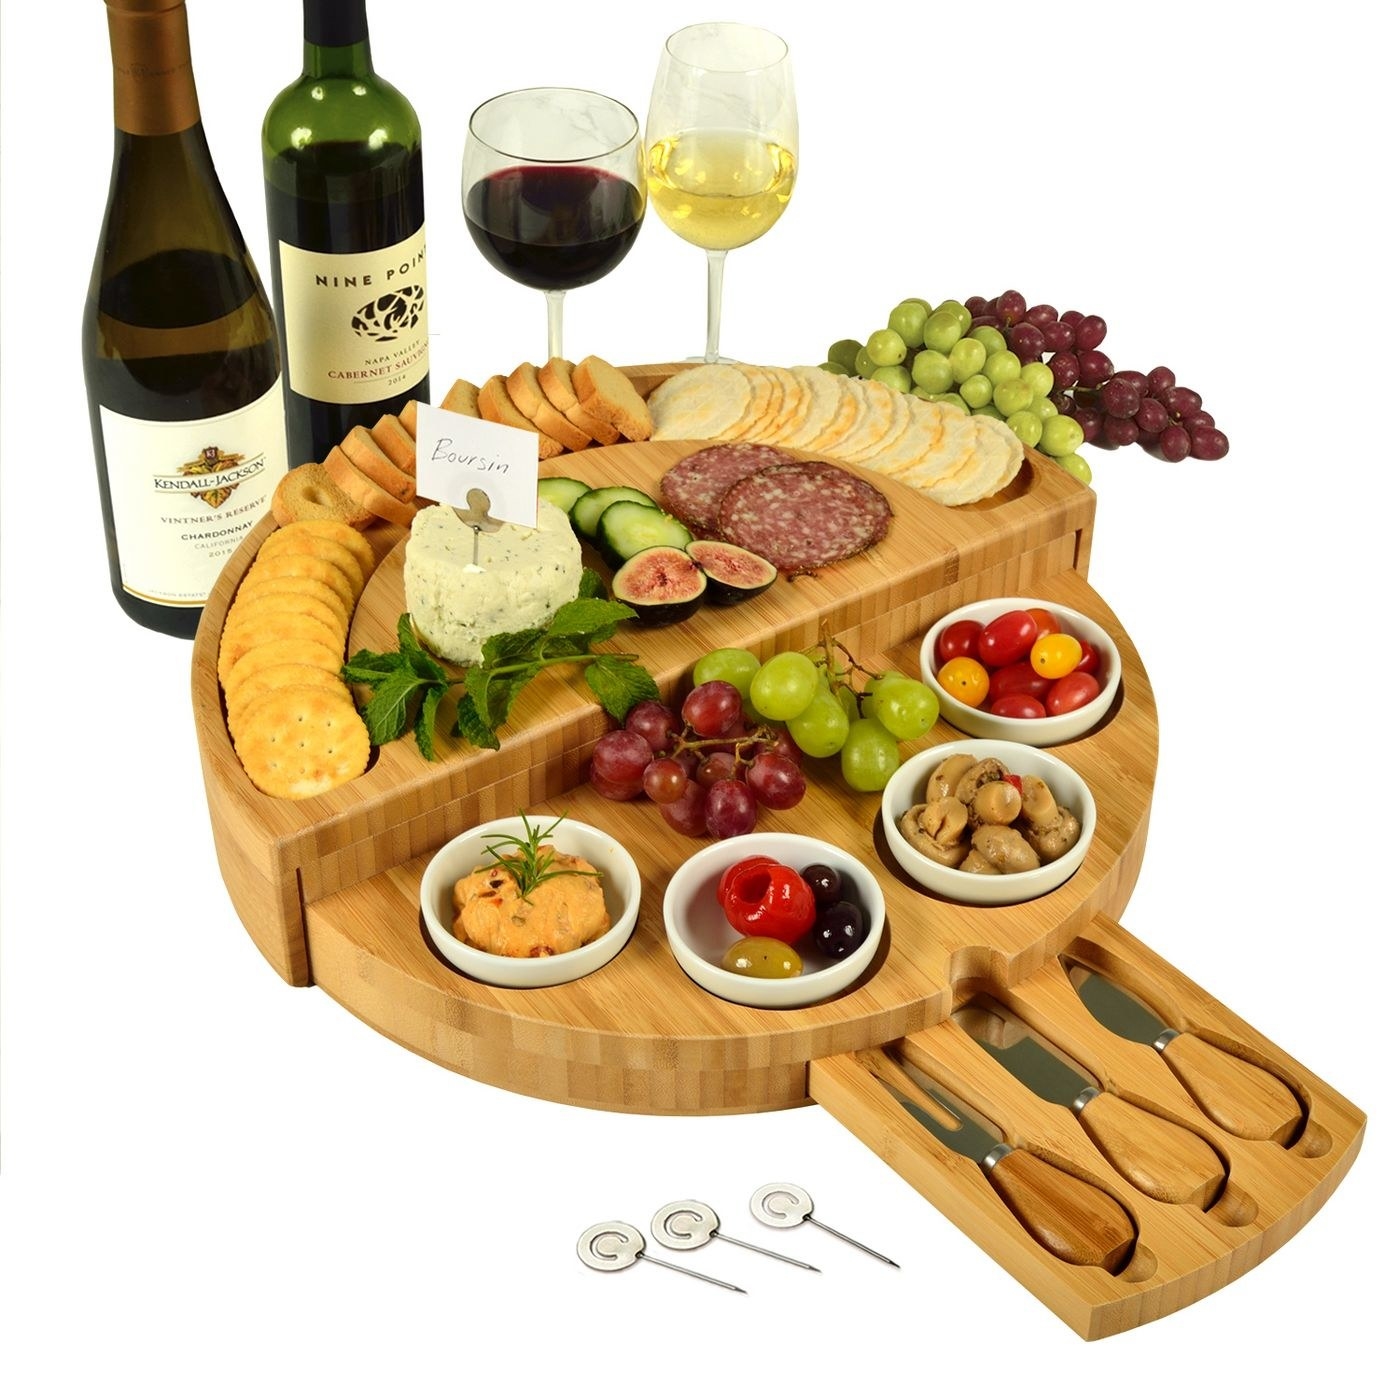 A cheese board filled with charcuterie